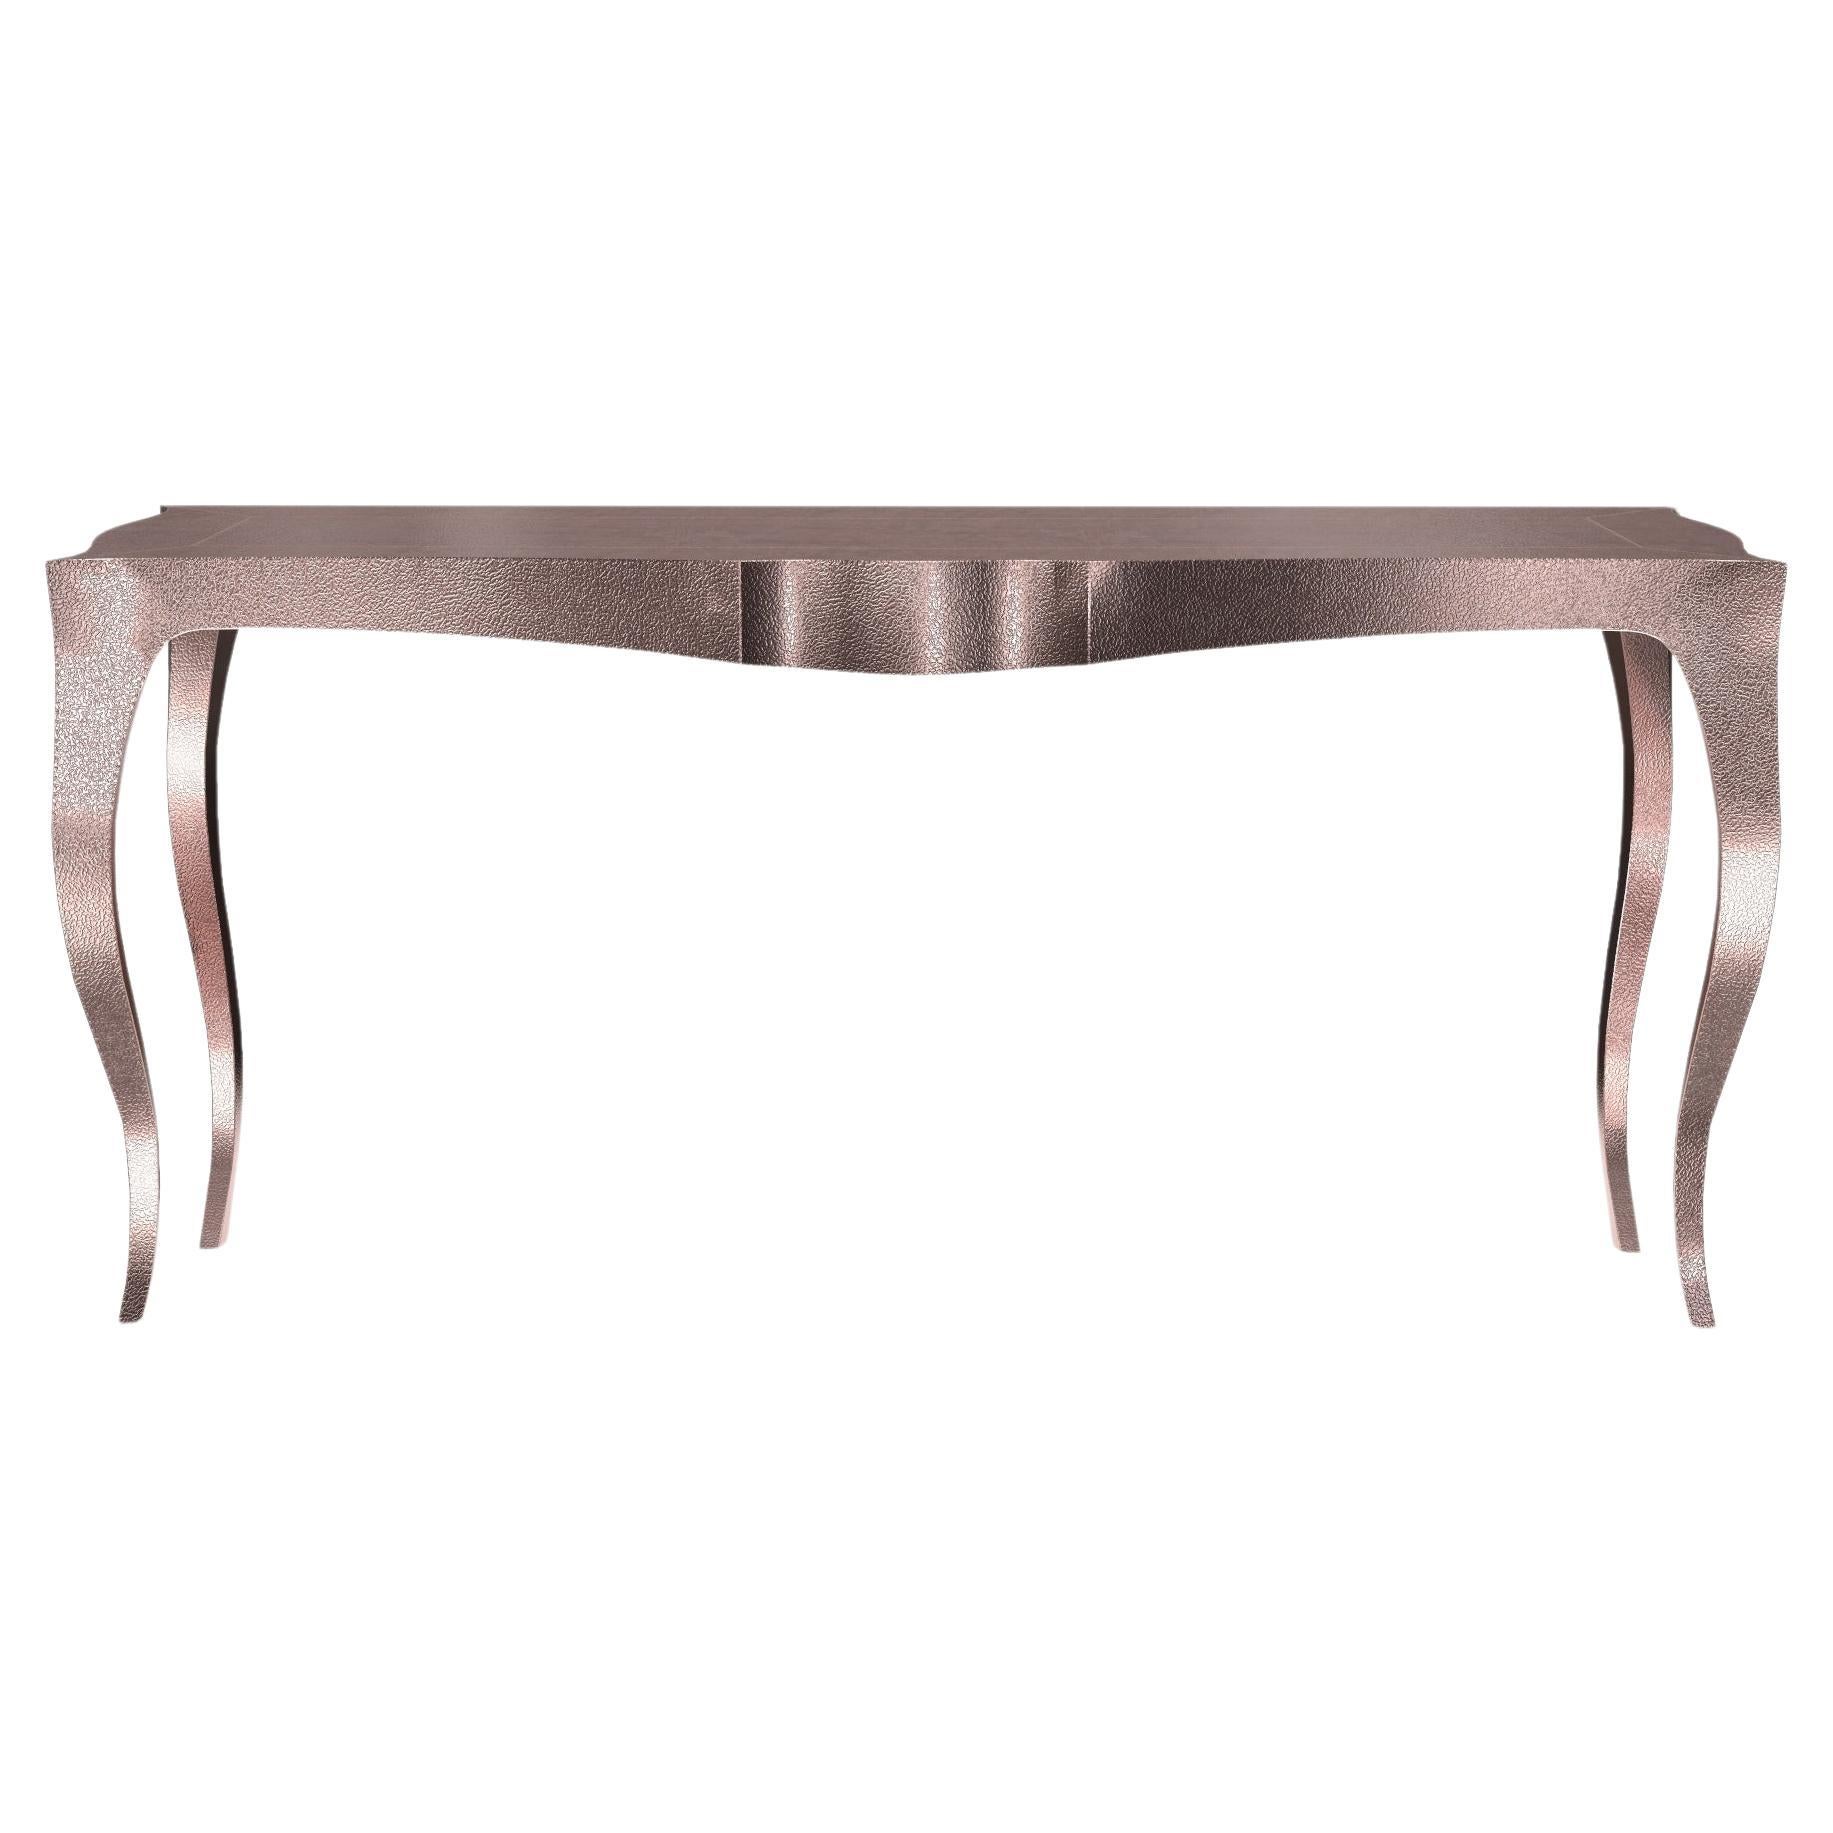 Louise Console Art Deco Industrial and Work Table Fine Hammered Copper 